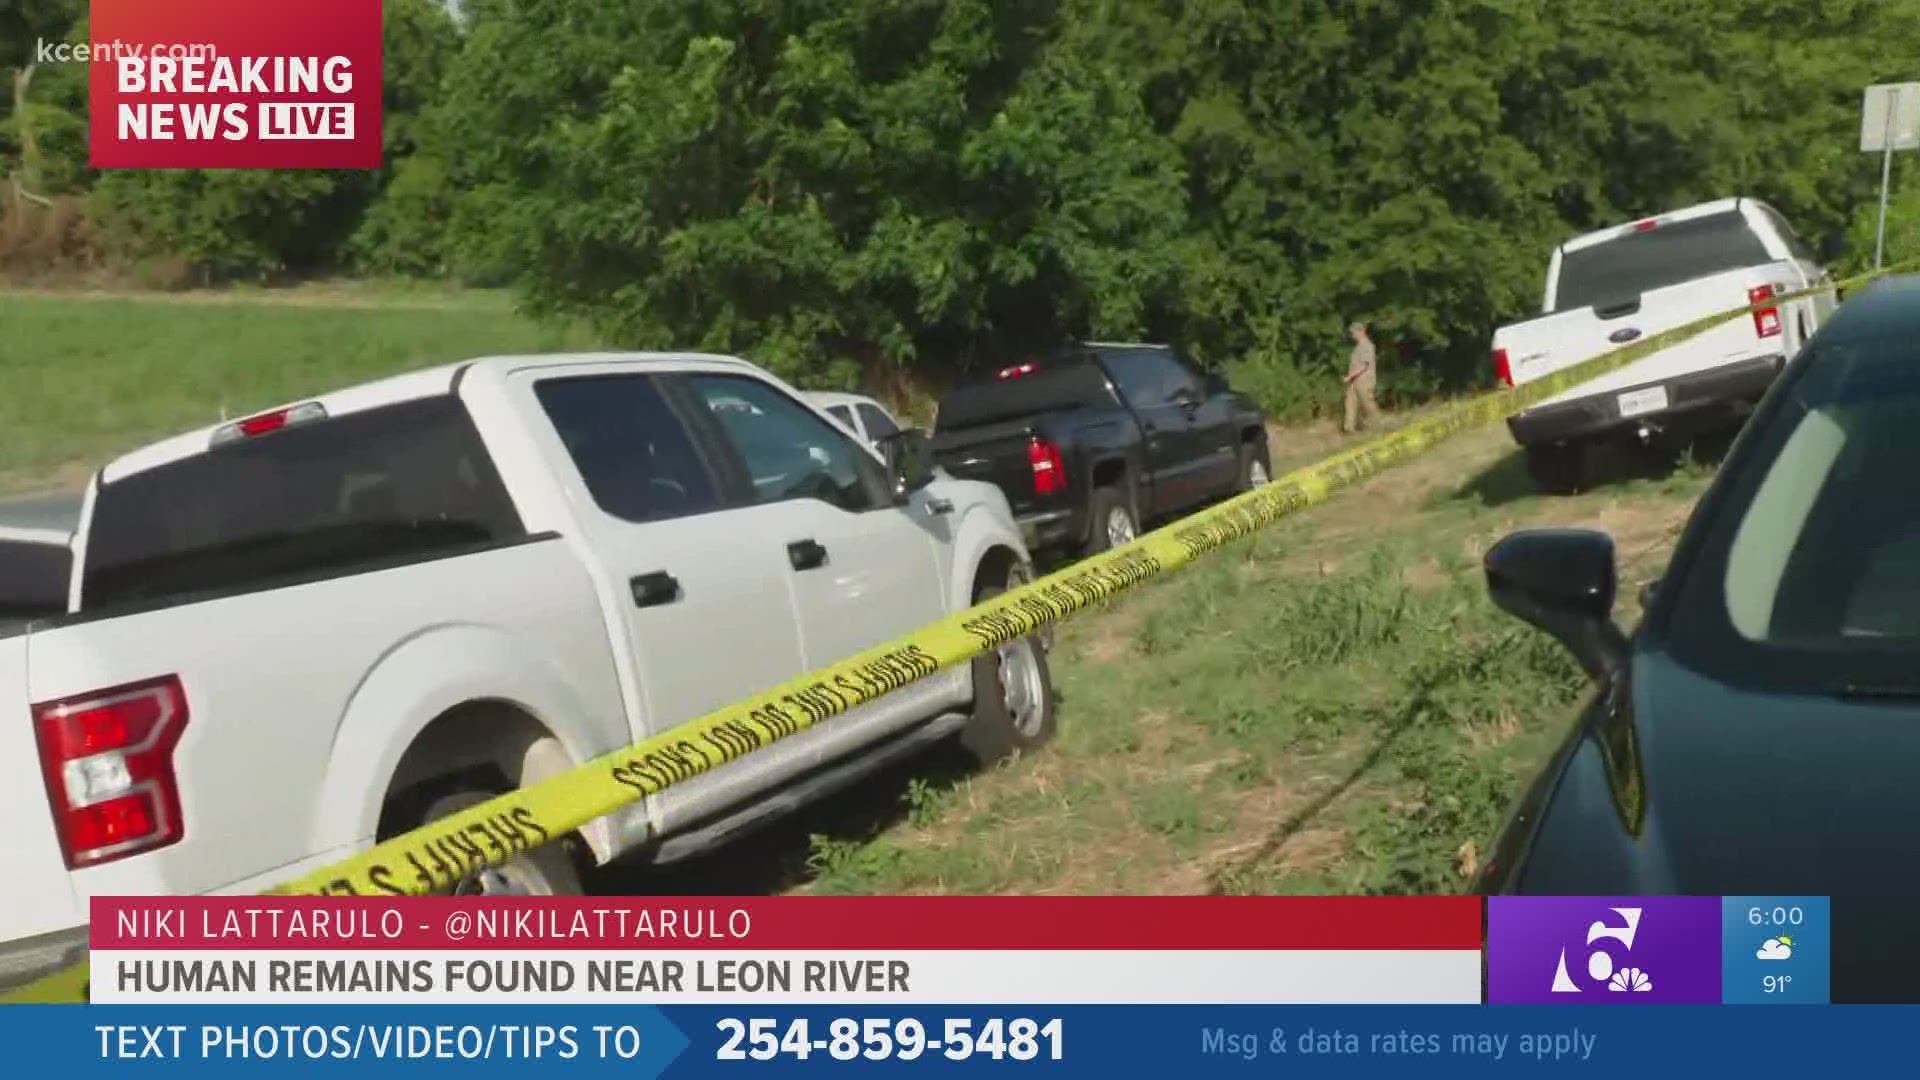 A civilian found what is believed to be human remains but no identification has been made